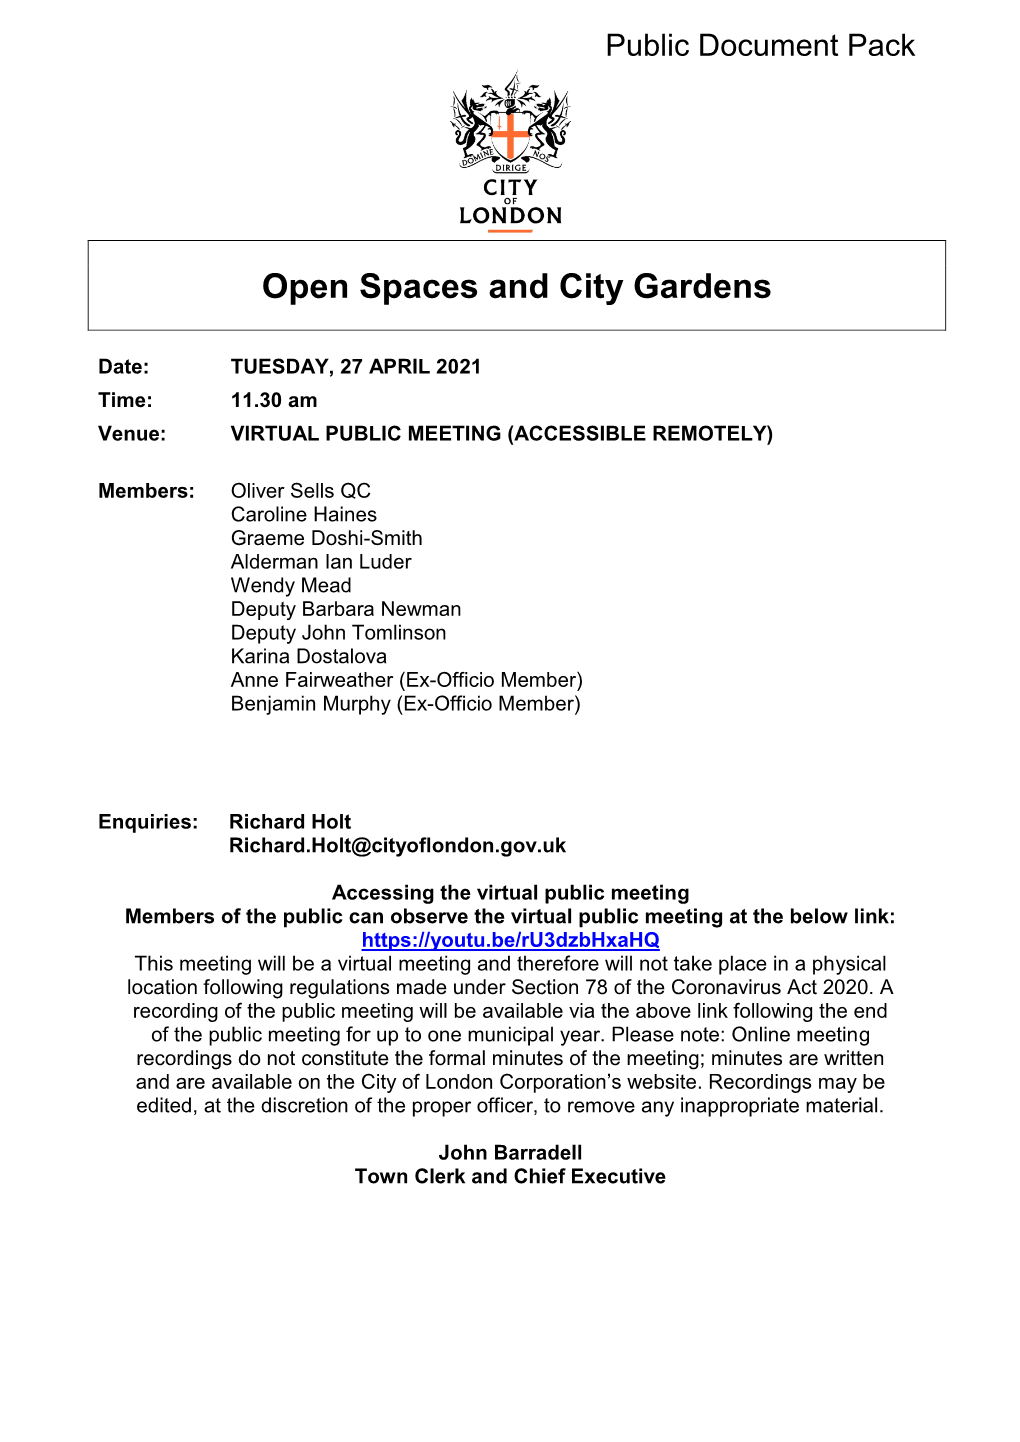 Agenda Document for Open Spaces and City Gardens, 27/04/2021 11:30